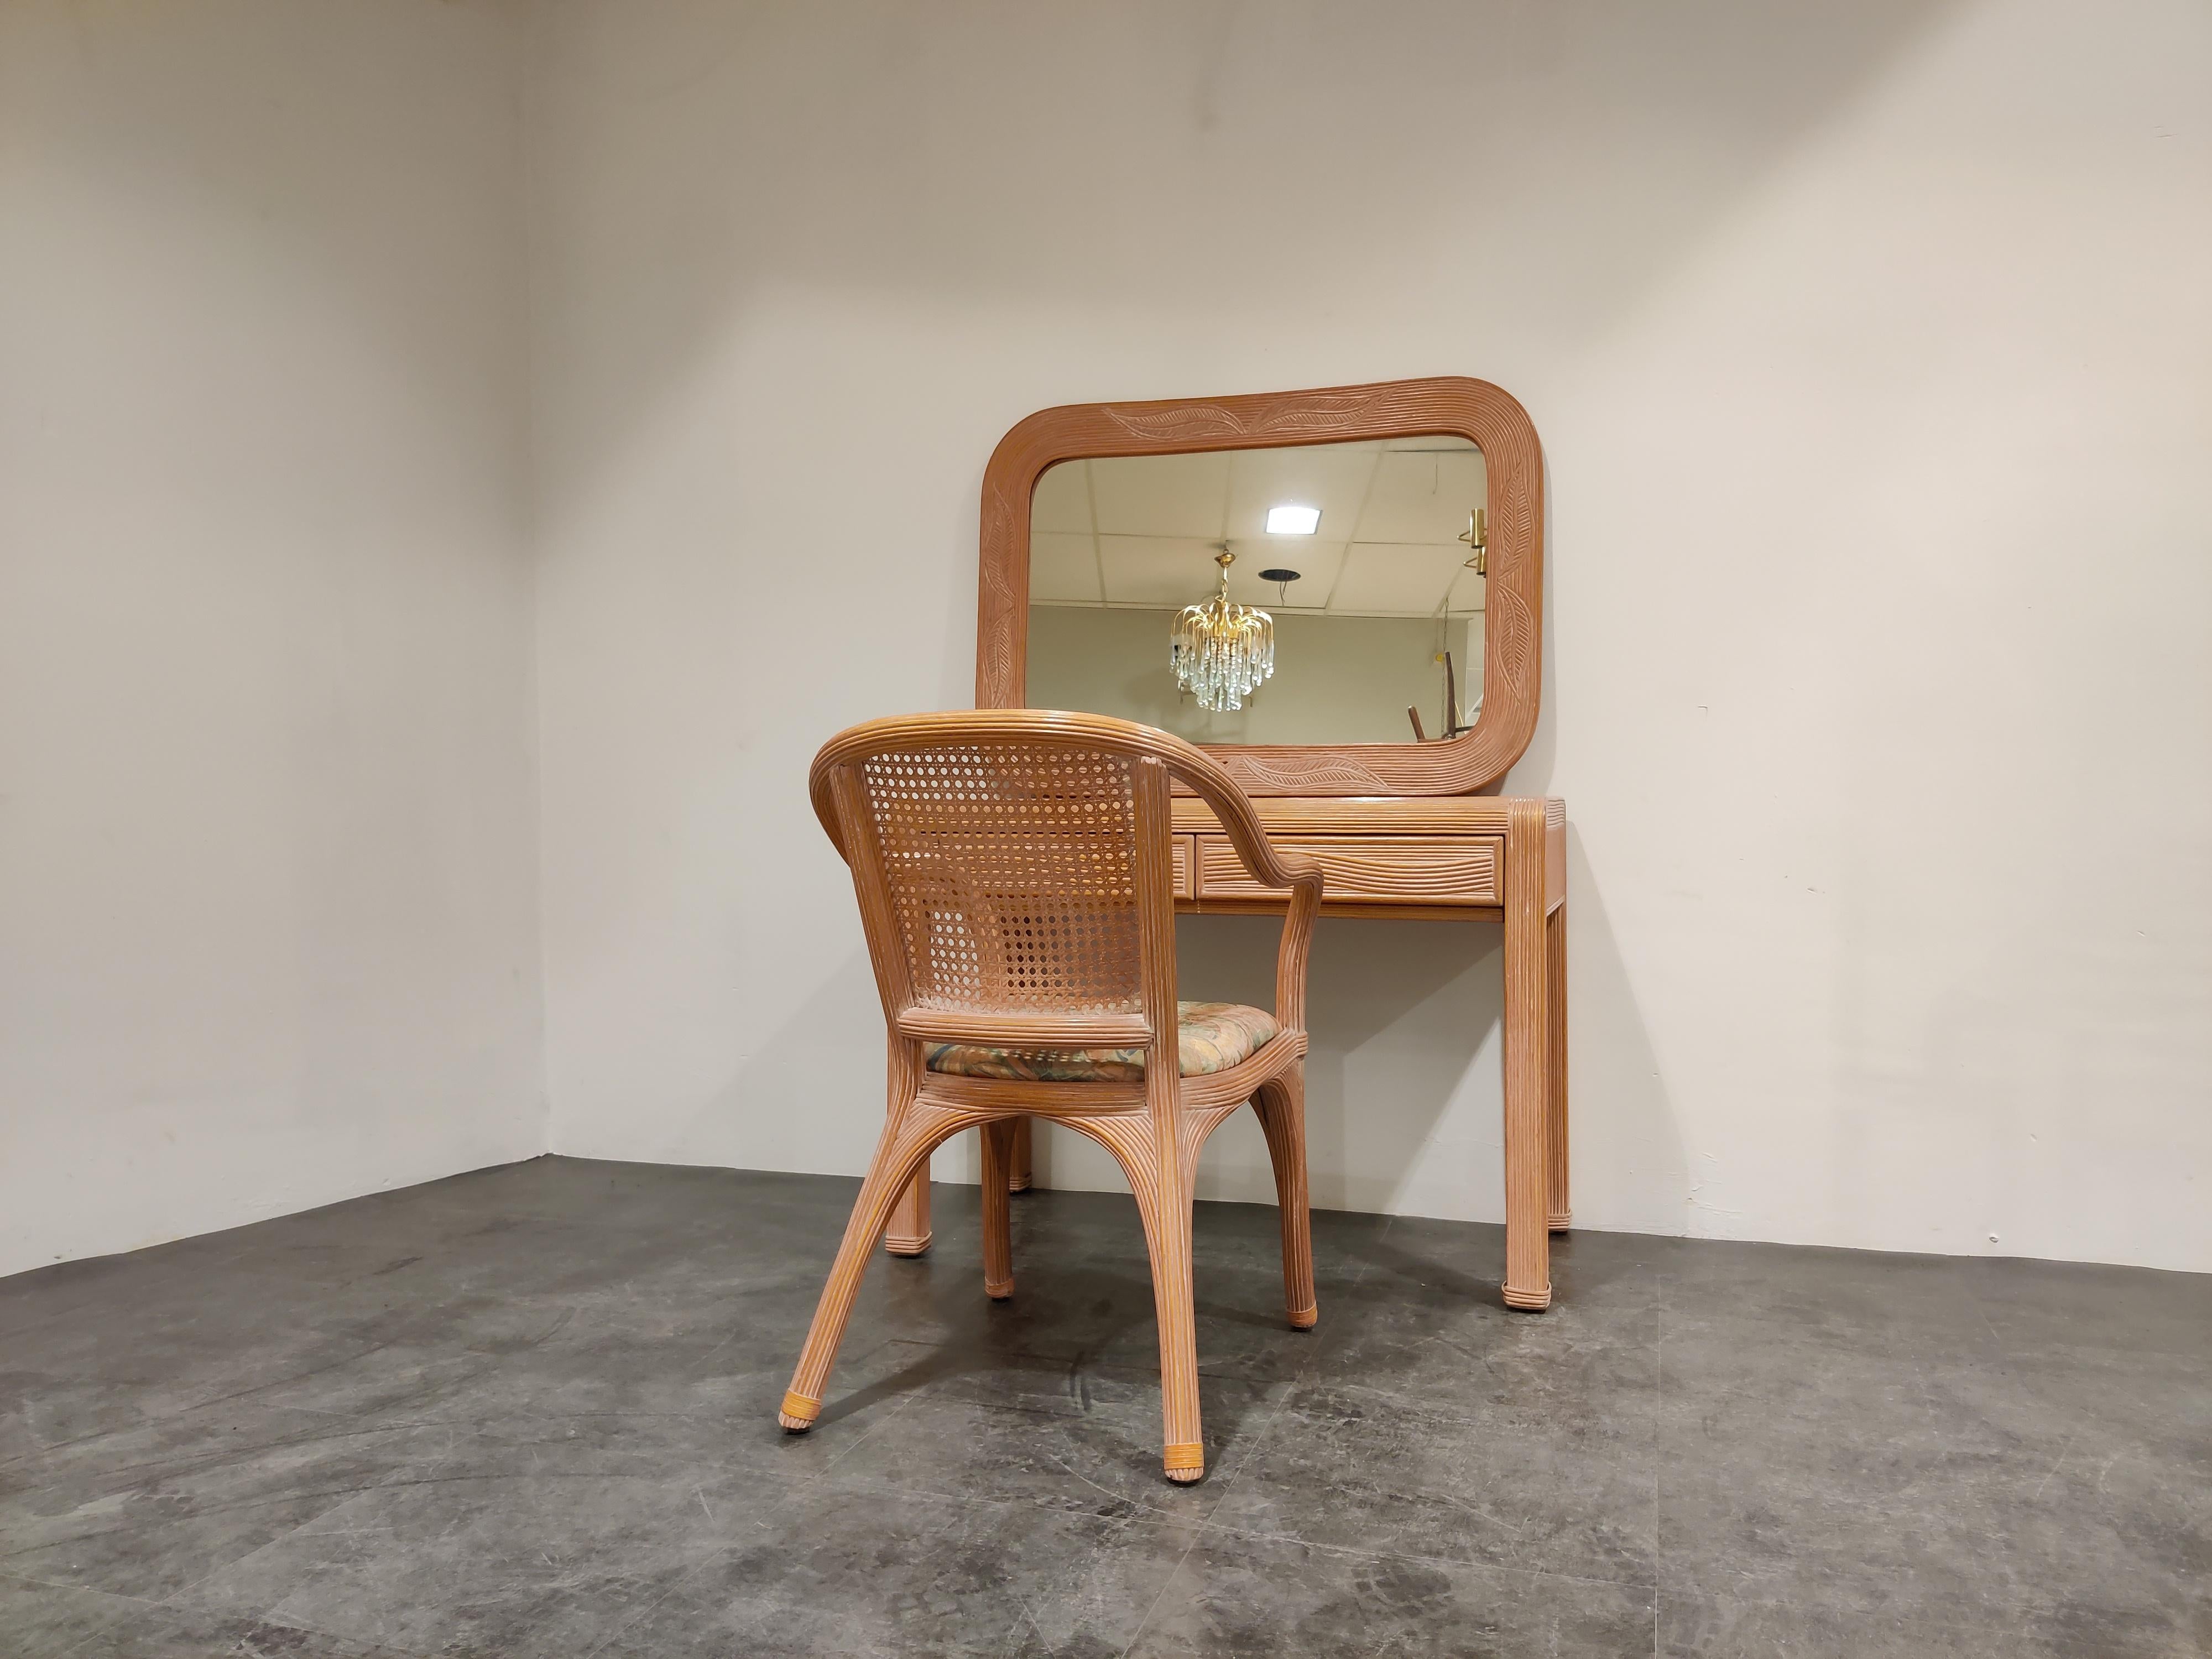 Vintage bamboo vanity table set with a mirror and chair.

In the manner of Vivai del Sud.

Good condition

1970s, Belgium

Dimensions:
Console
Height 78cm/30.70